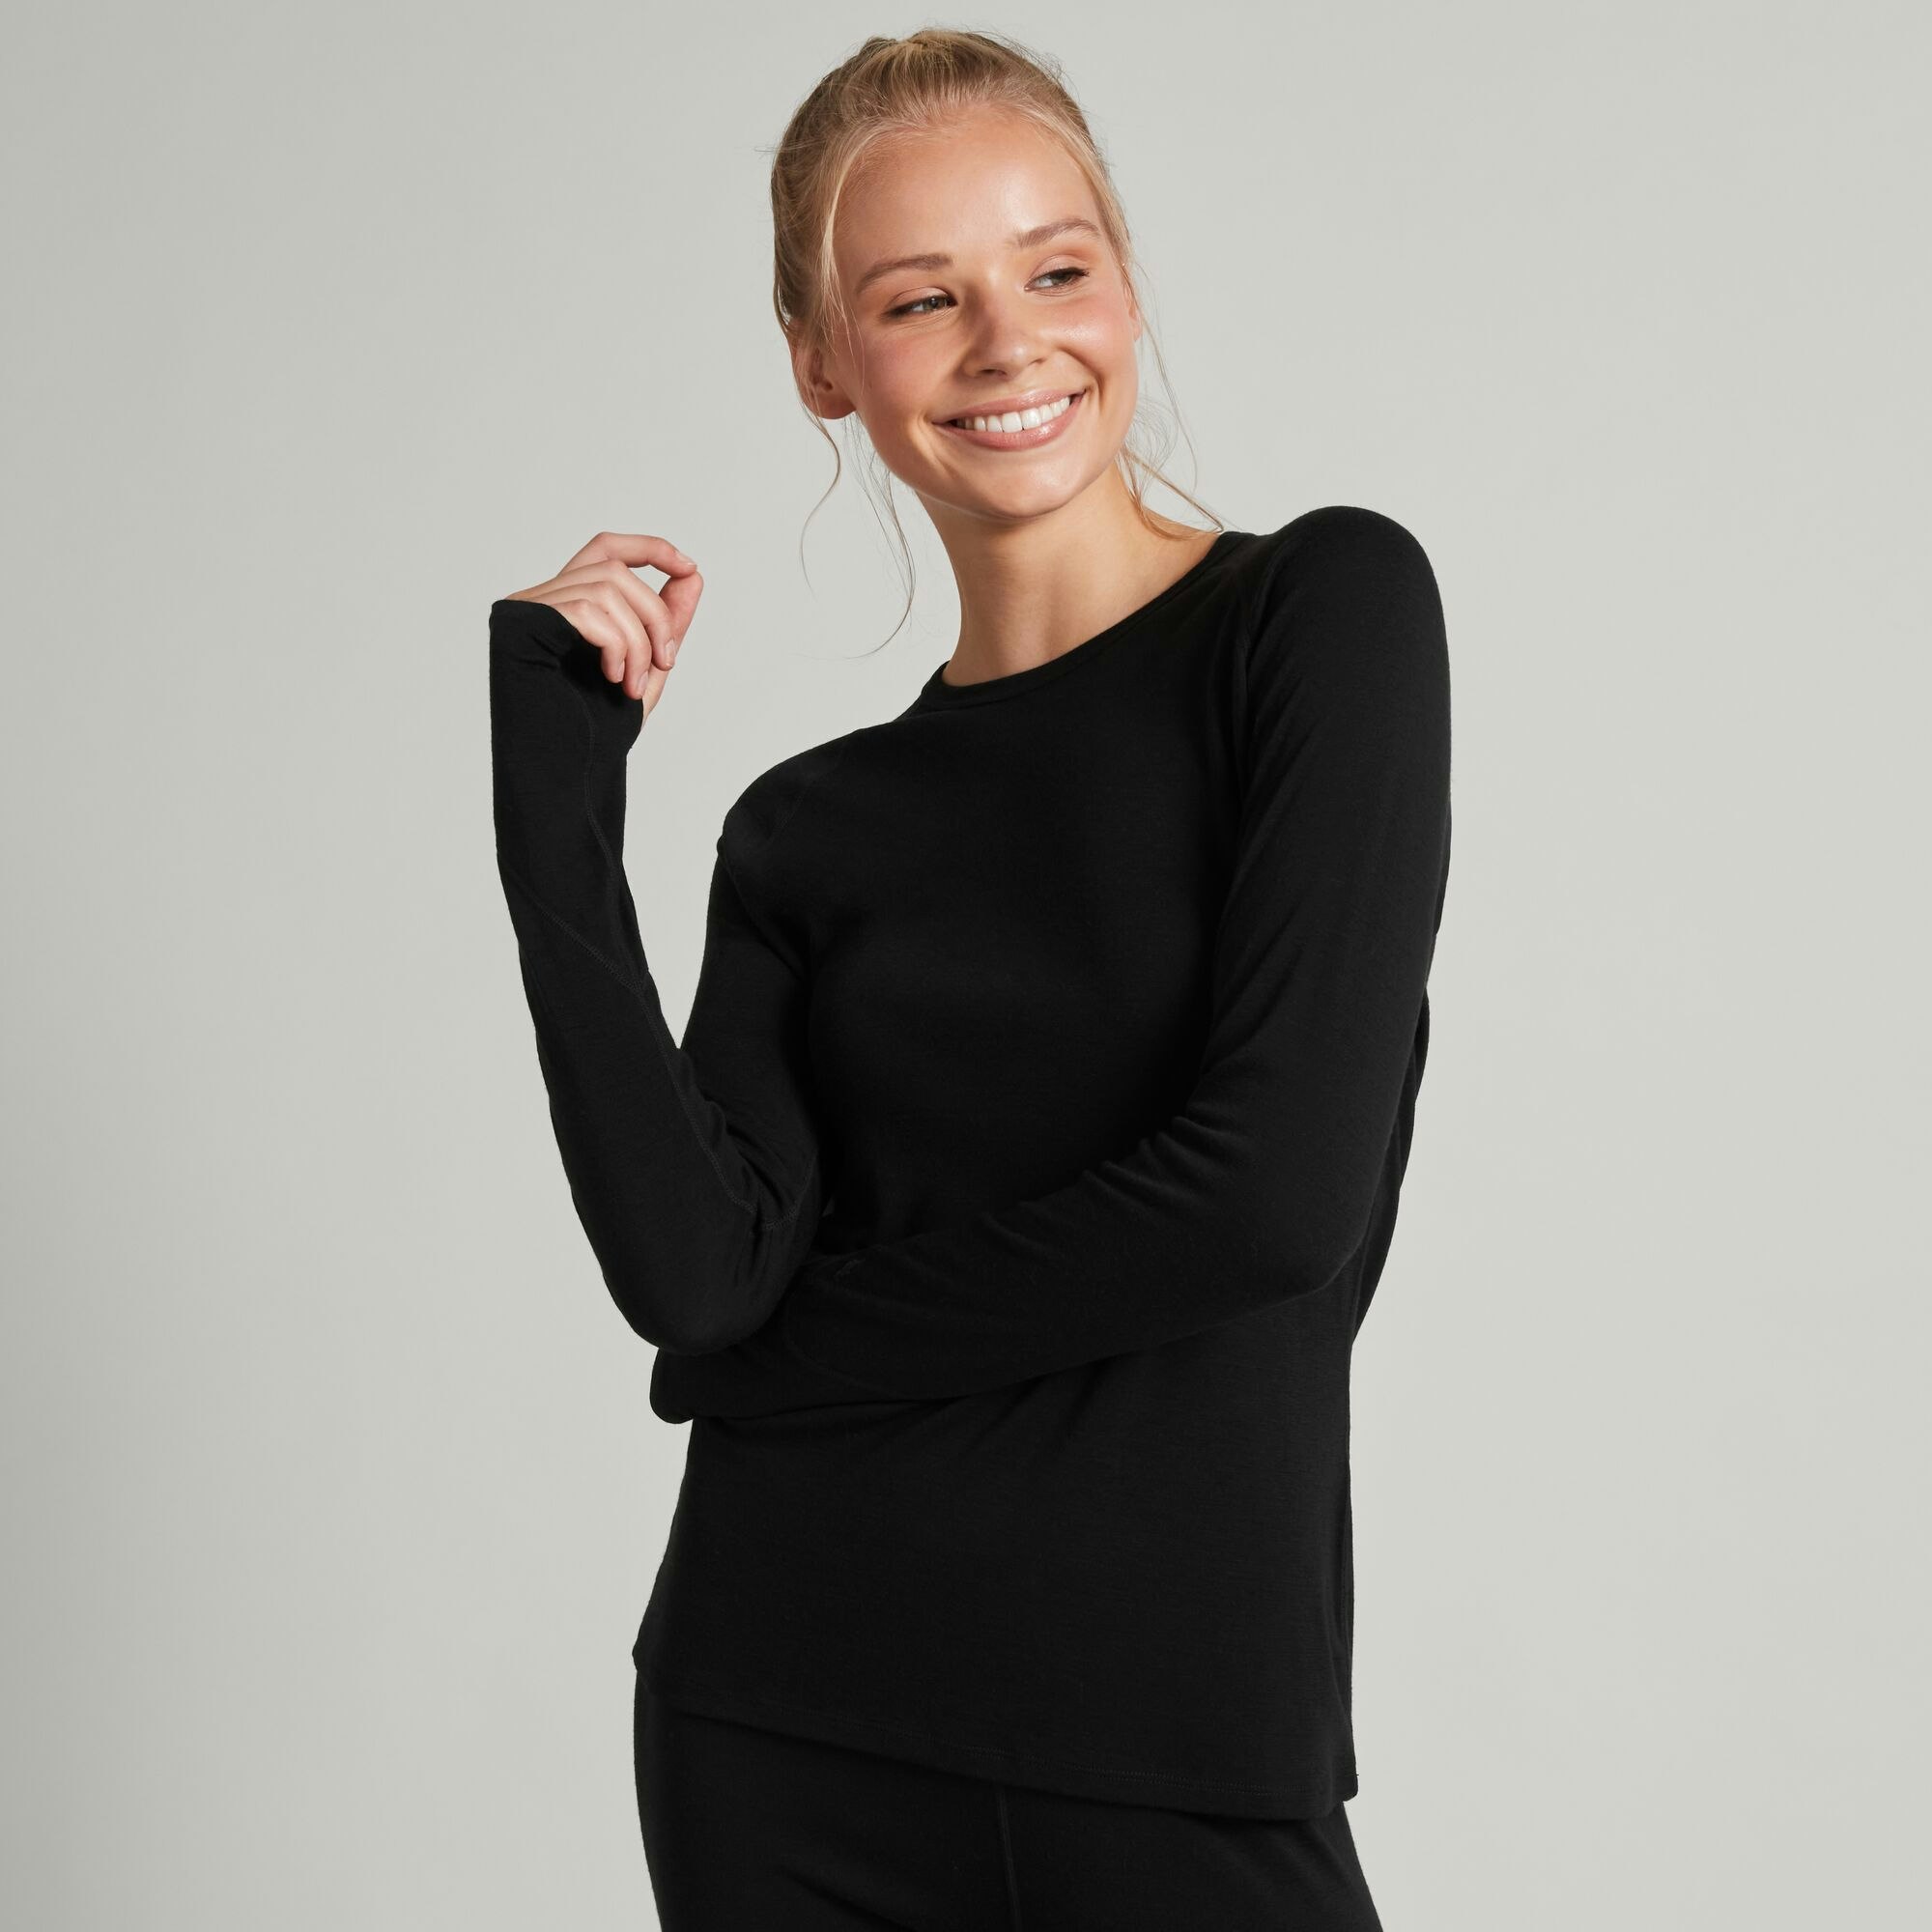 Buy Women's Thermal Tops & Base Layers